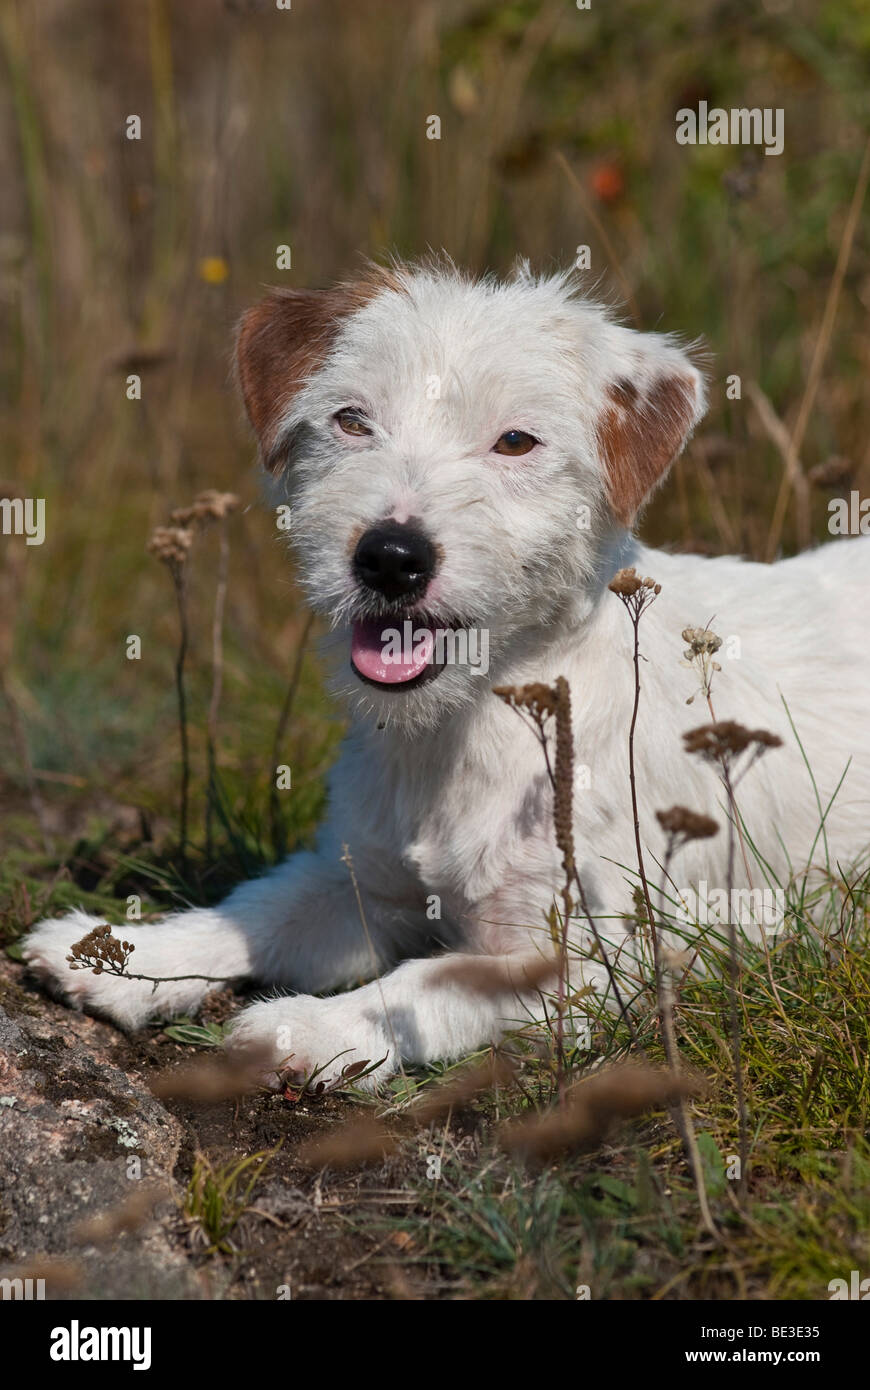 Jack Russell Terrier lying on grass Banque D'Images